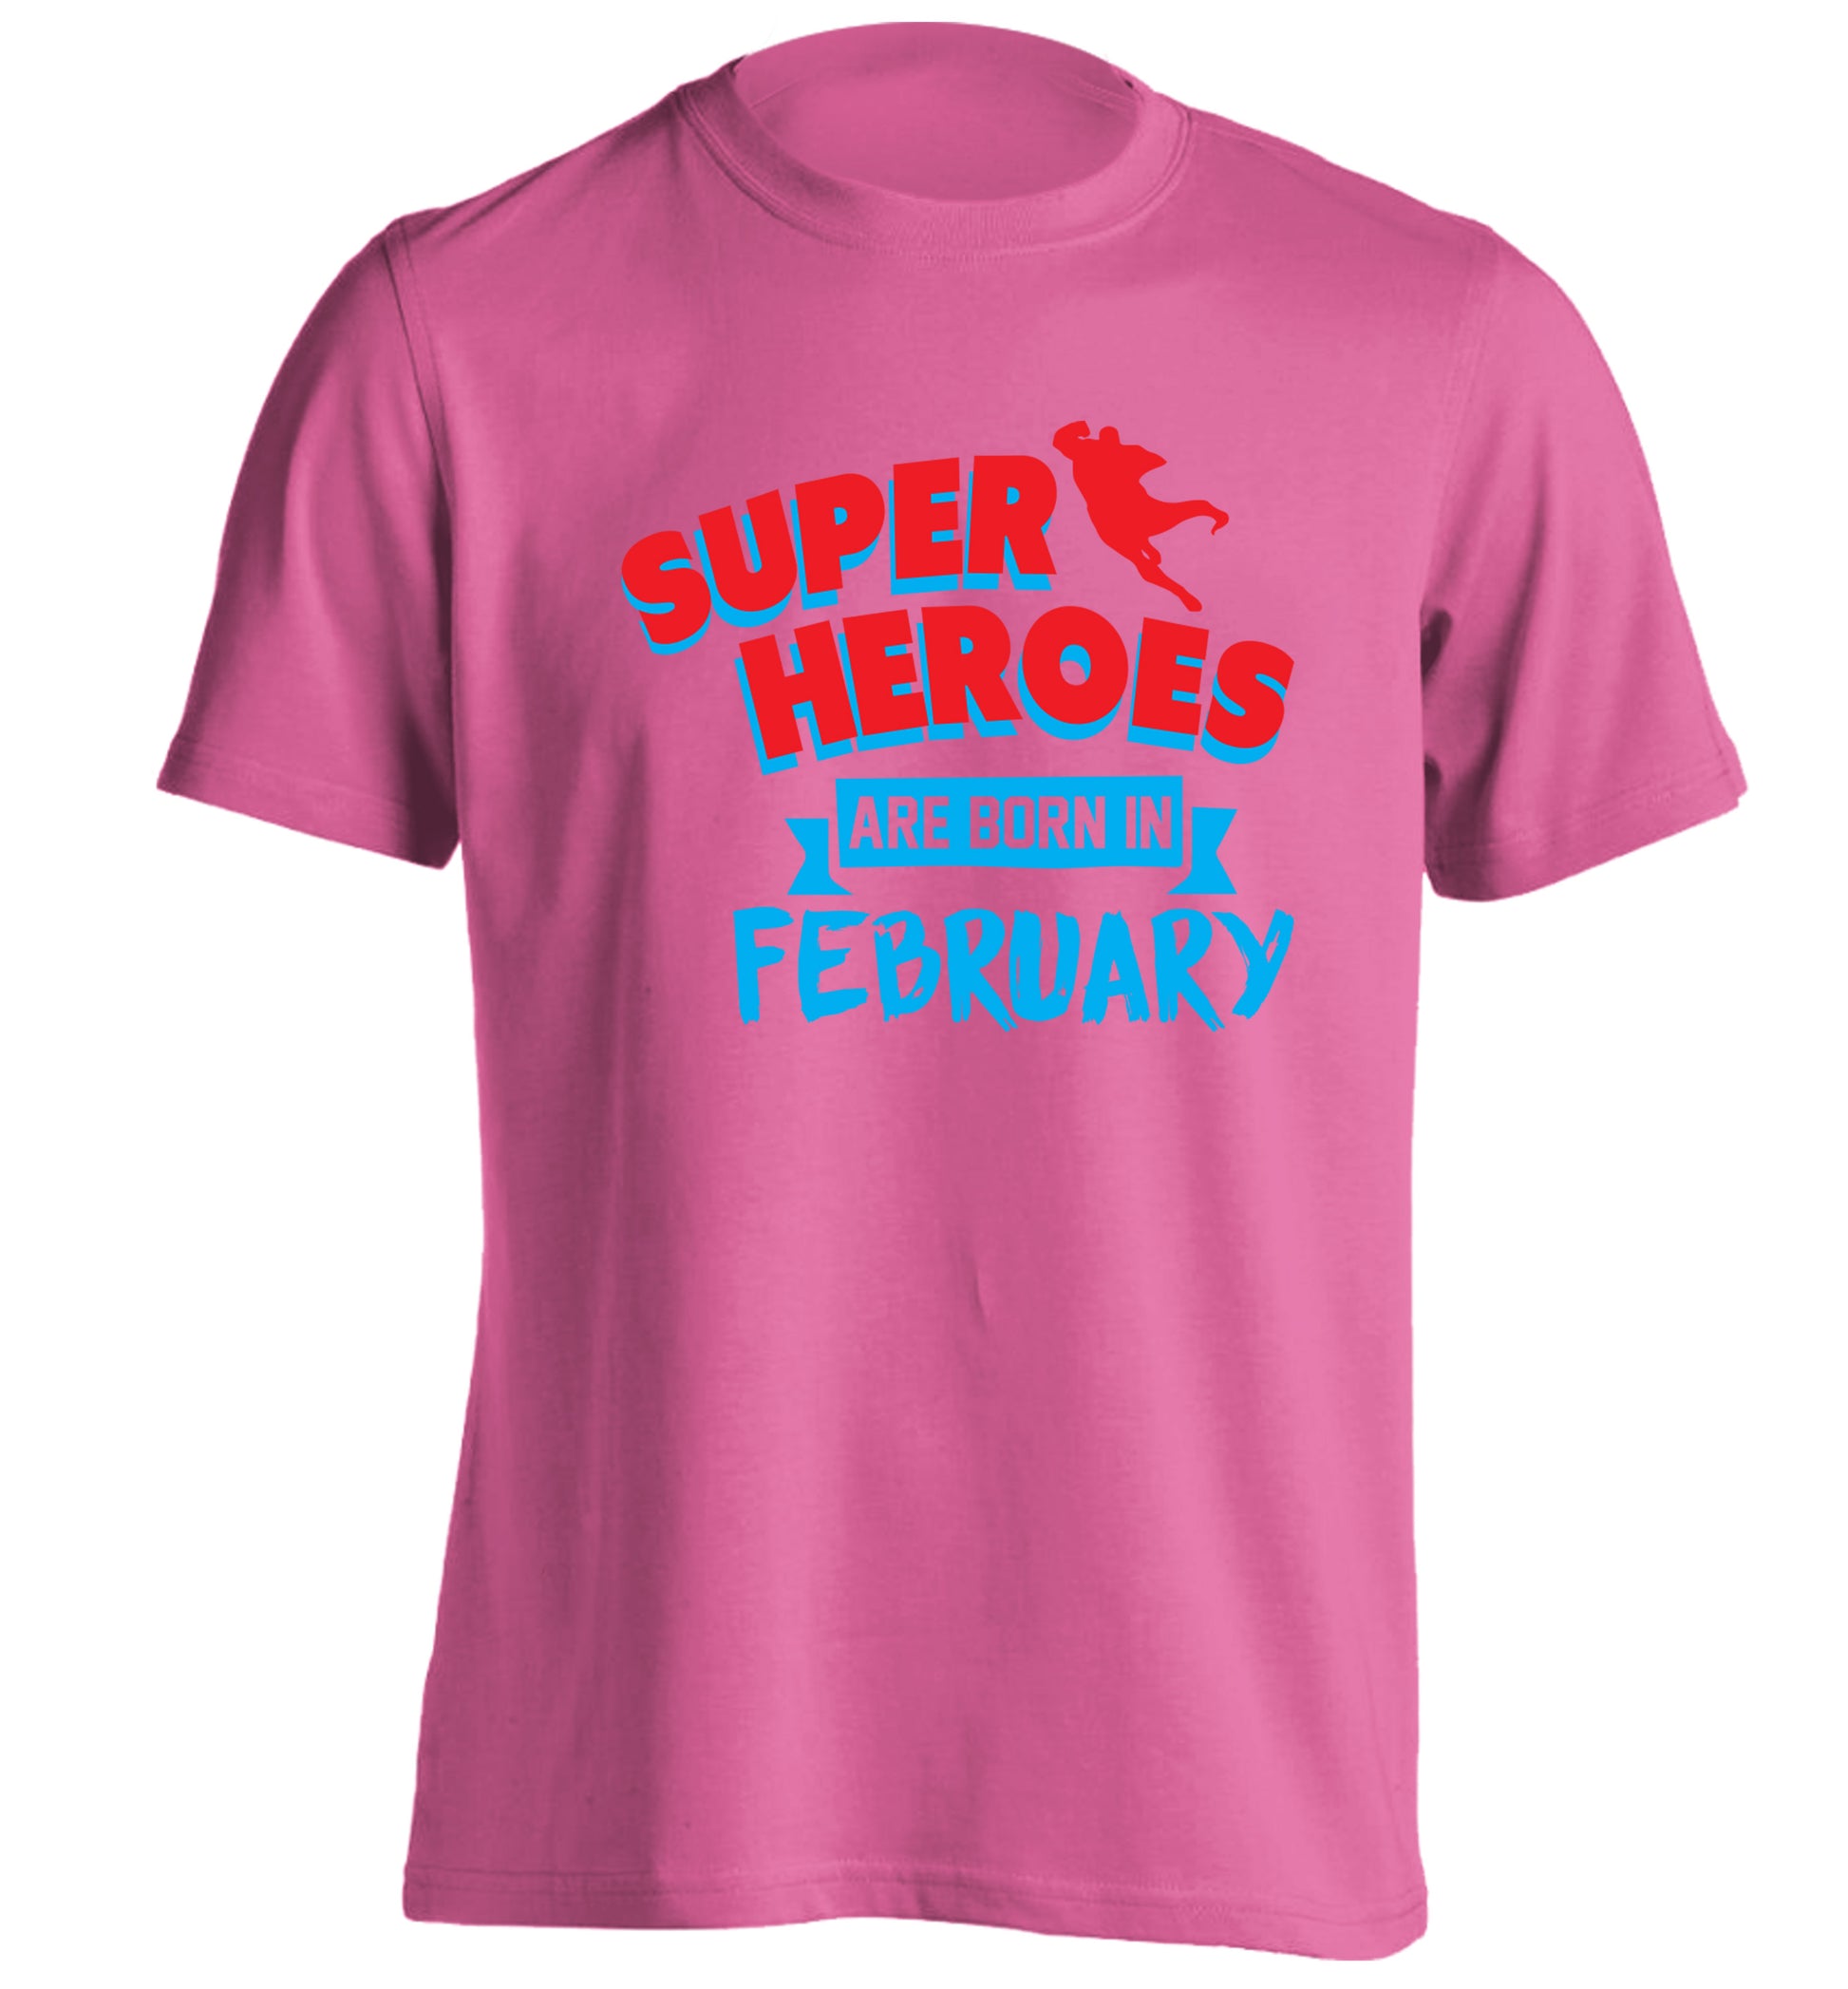 superheroes are born in February adults unisex pink Tshirt 2XL